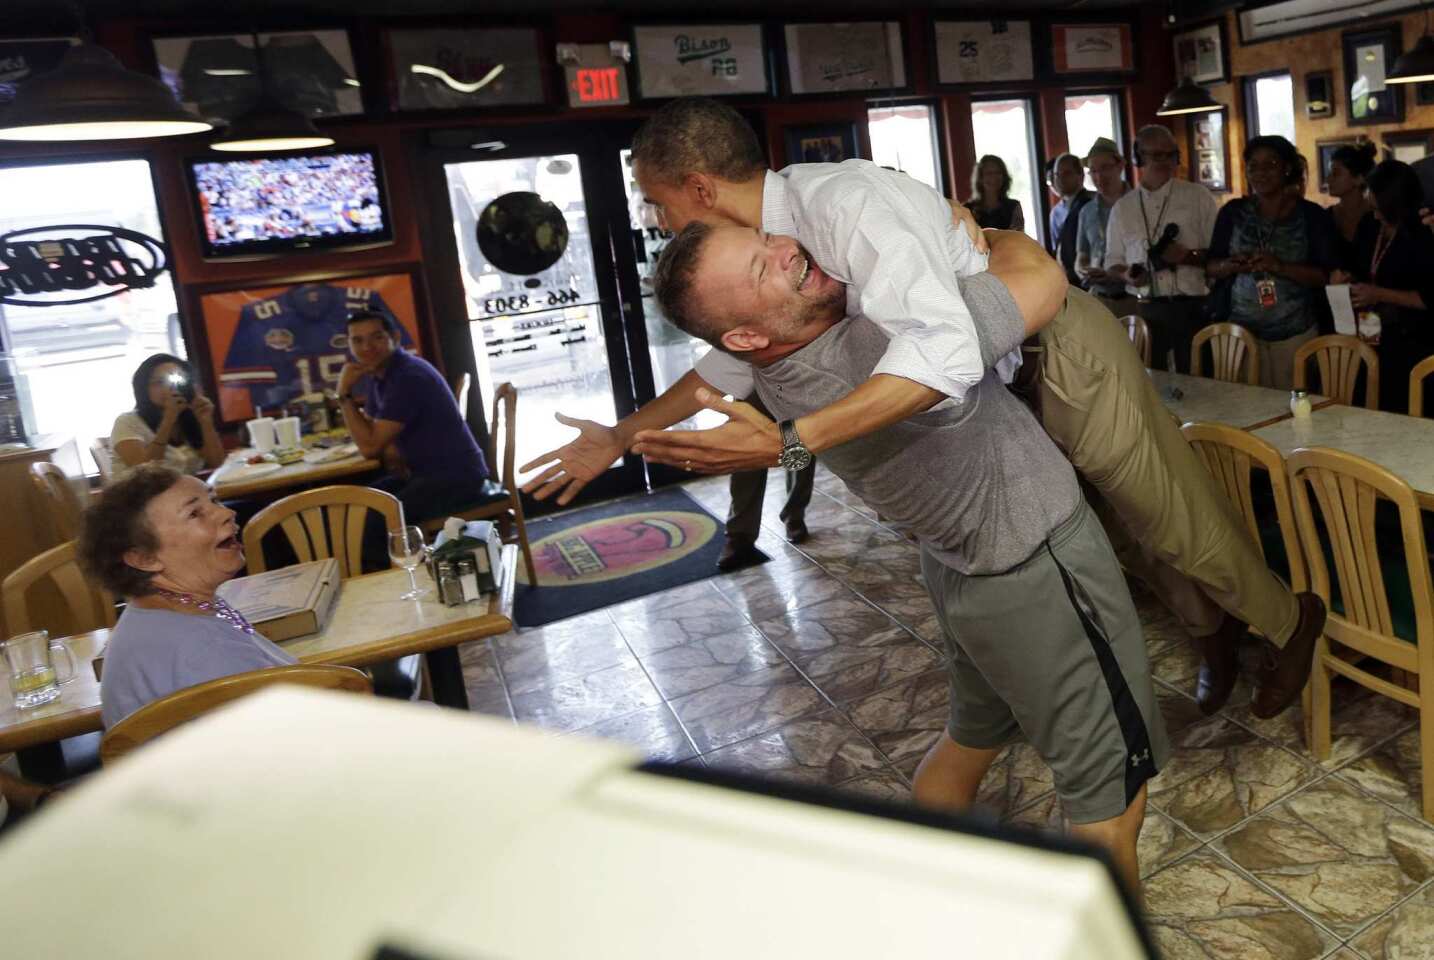 President Obama is lifted off the ground by restaurant owner Scott Van Duzer during a visit to Duzer's Big Apple Pizza in Fort Pierce, Fla.